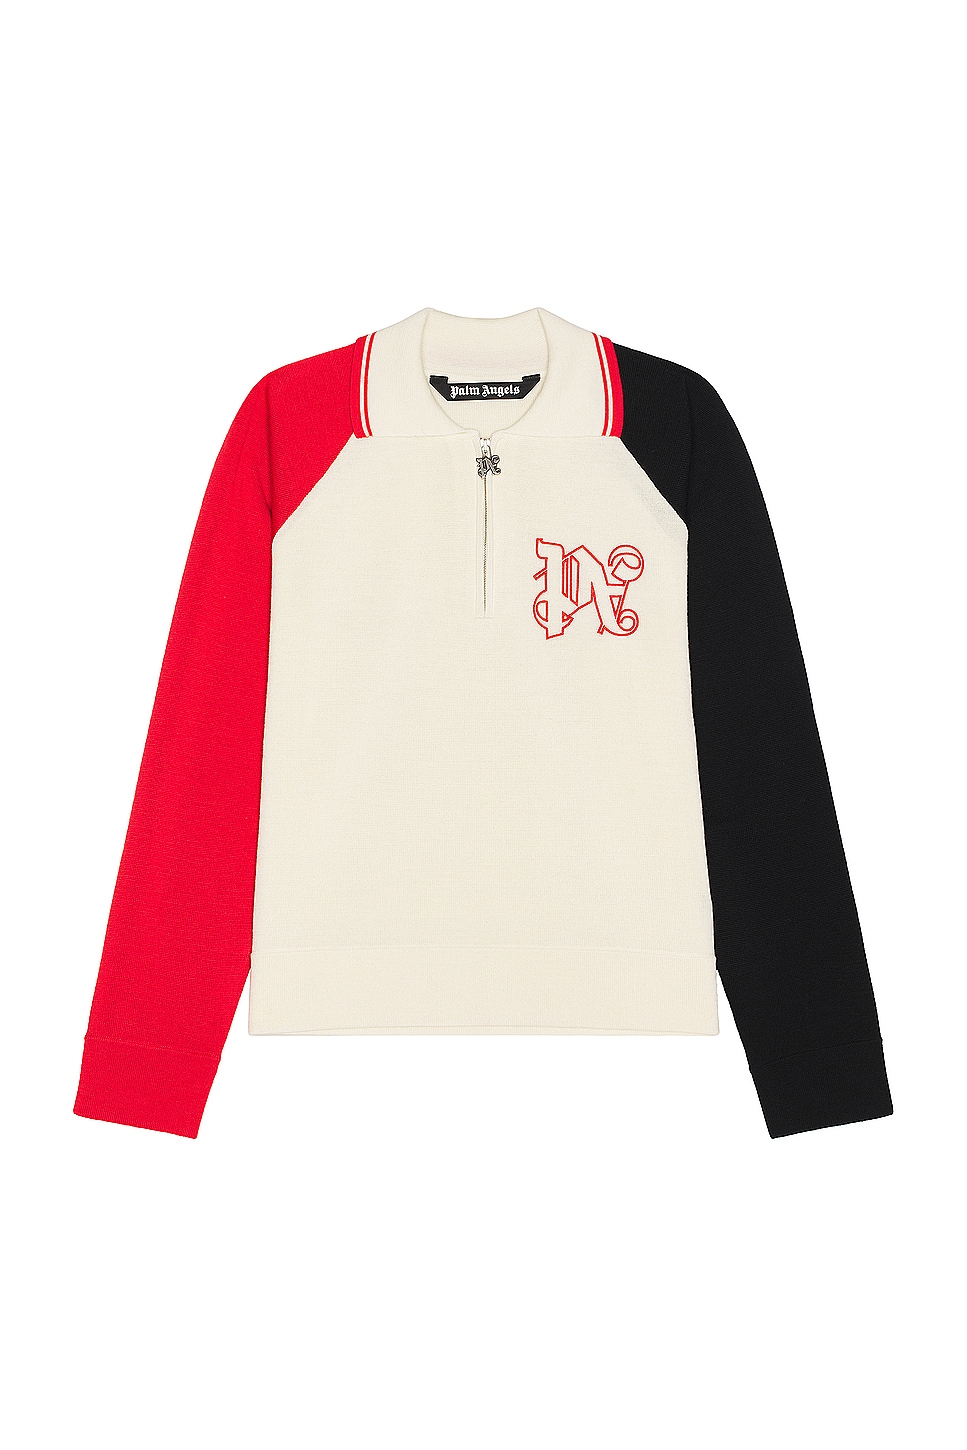 Image 1 of Palm Angels X Formula 1 Racing Knit Polo Zip Sweater in White, Red, & Black